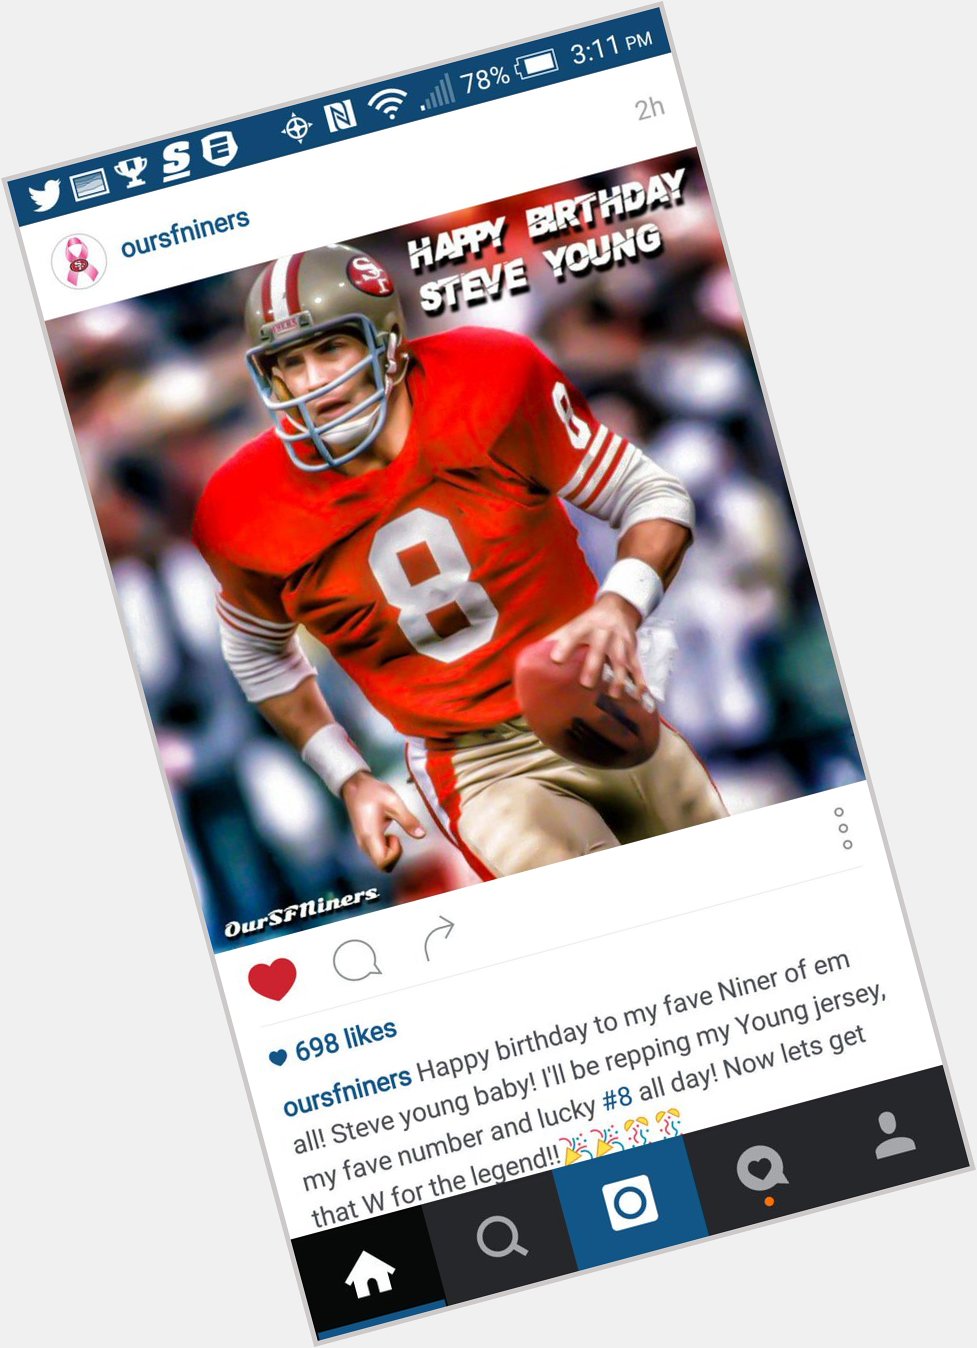 I like this photo.. Happy birthday Hall of Fame quarterback Steve Young 